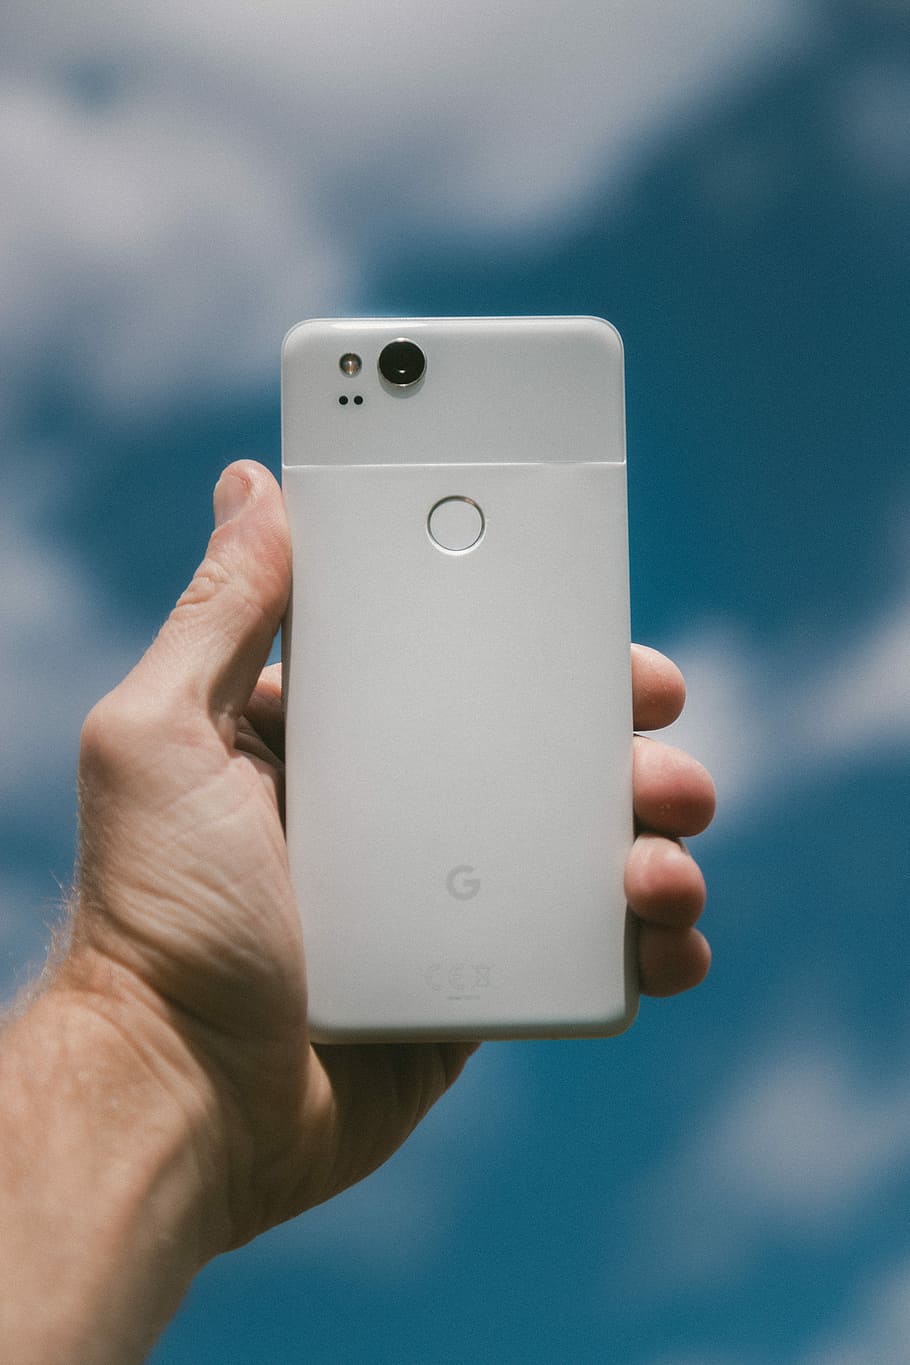 person holding white Google Android smartphone, person holding very silver Google Pixel XL smartphone